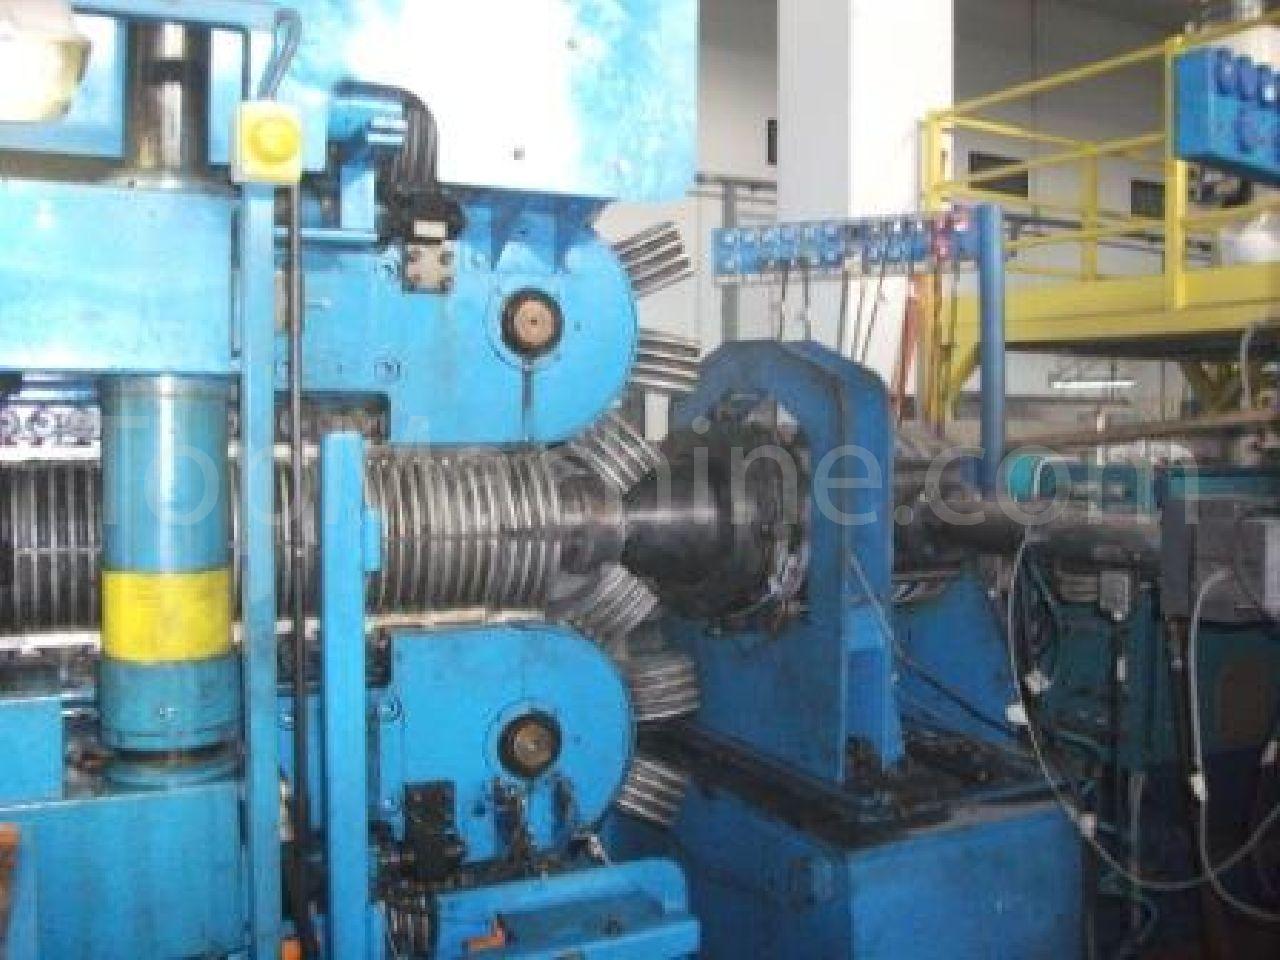 Used Corma 1520 Extrusion Corrugated pipe line